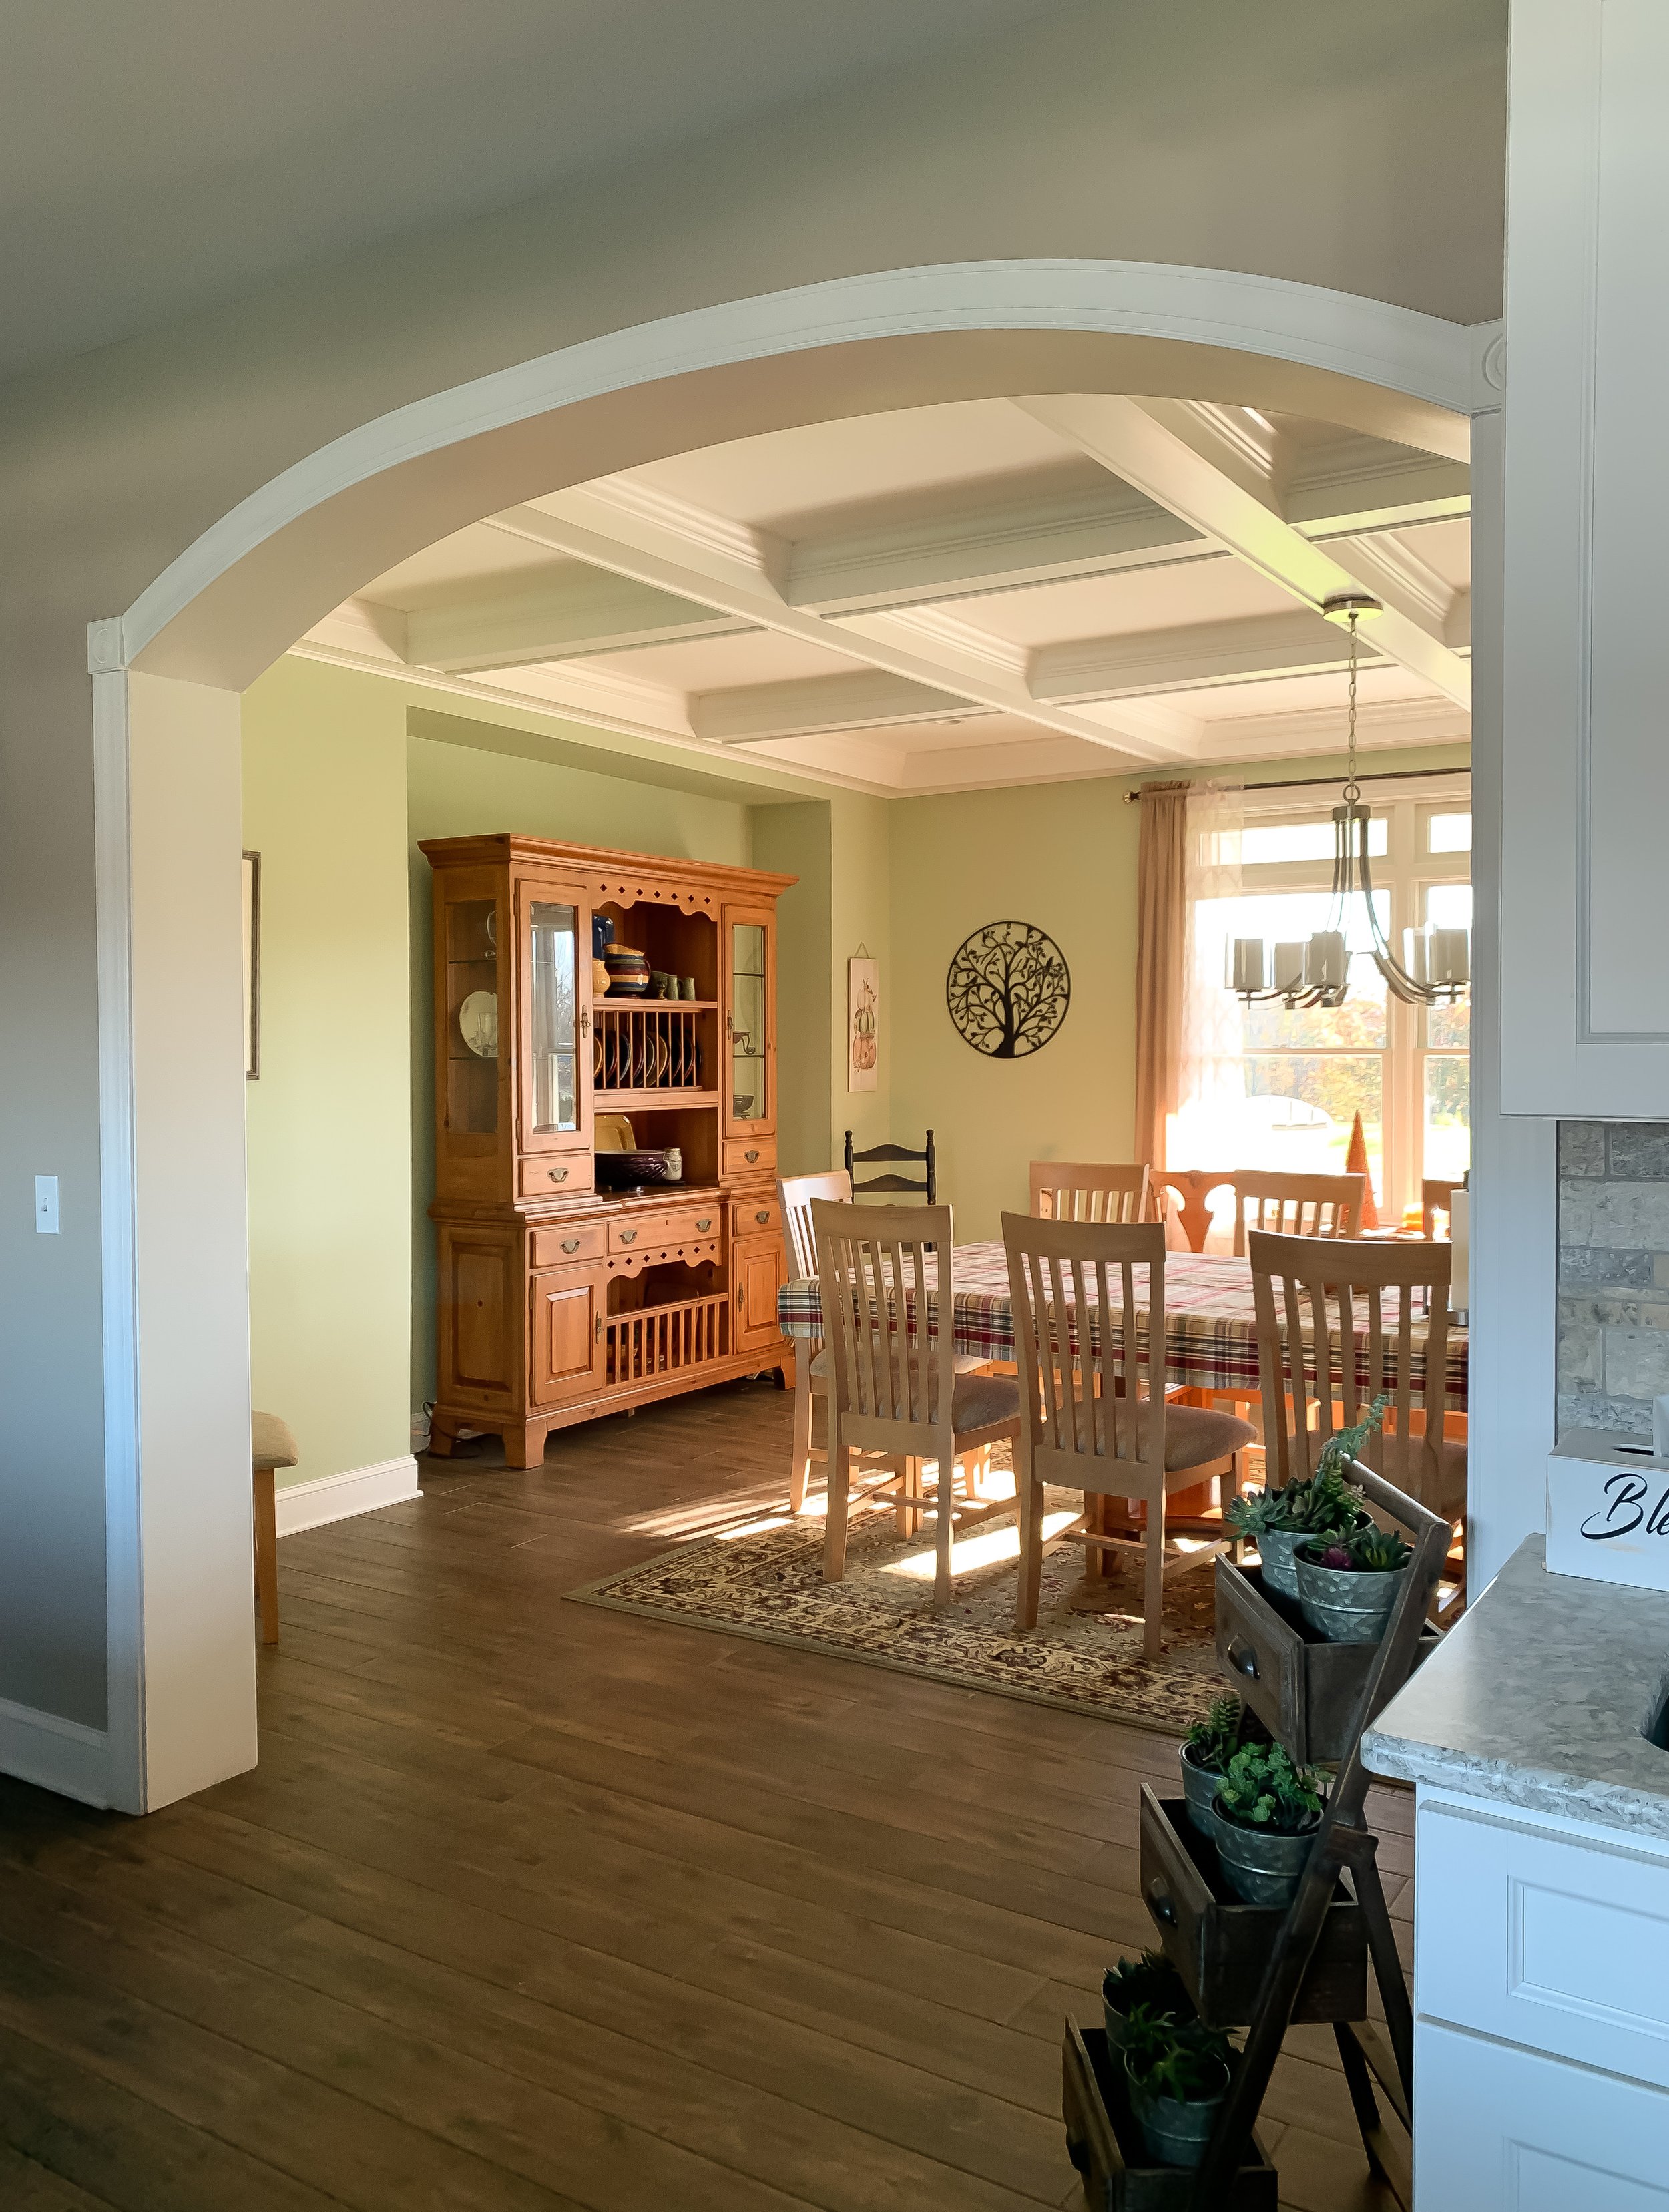 Dining room adjacent to kitchen with arched entryway.JPEG